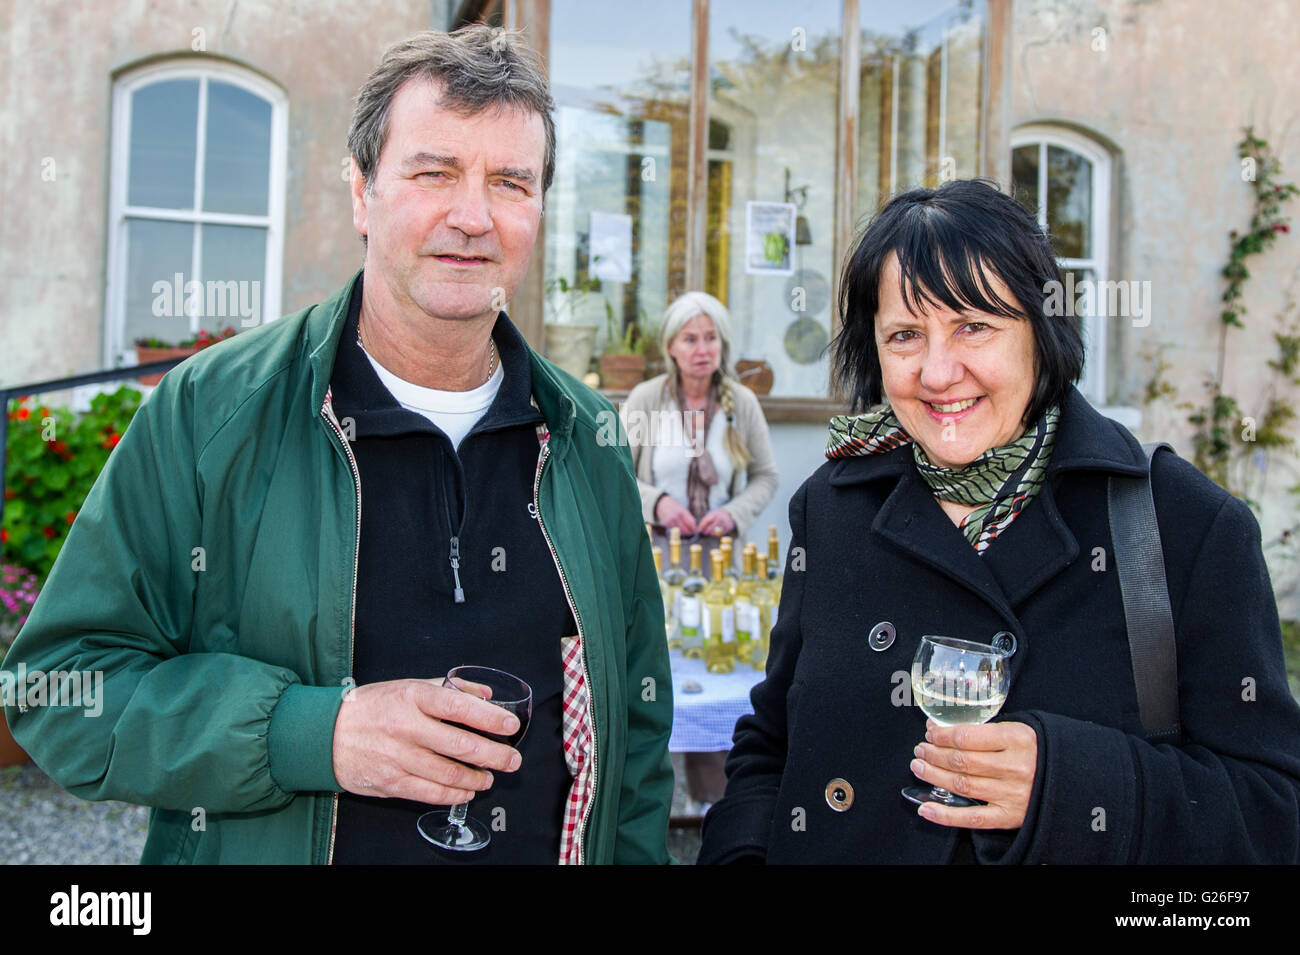 Schull, Ireland. 25th May, 2016.  Former 'The Bill' and 'EastEnders' actor, Tony O'Callaghan and Film Maker, Iris Wakulenko attended the launch party for the 8th Schull Fastnet Film Festival, held at  Grove House, Schull, Ireland on Wednesday 25th May. Credit: Andy Gibson/Alamy Live News. Stock Photo